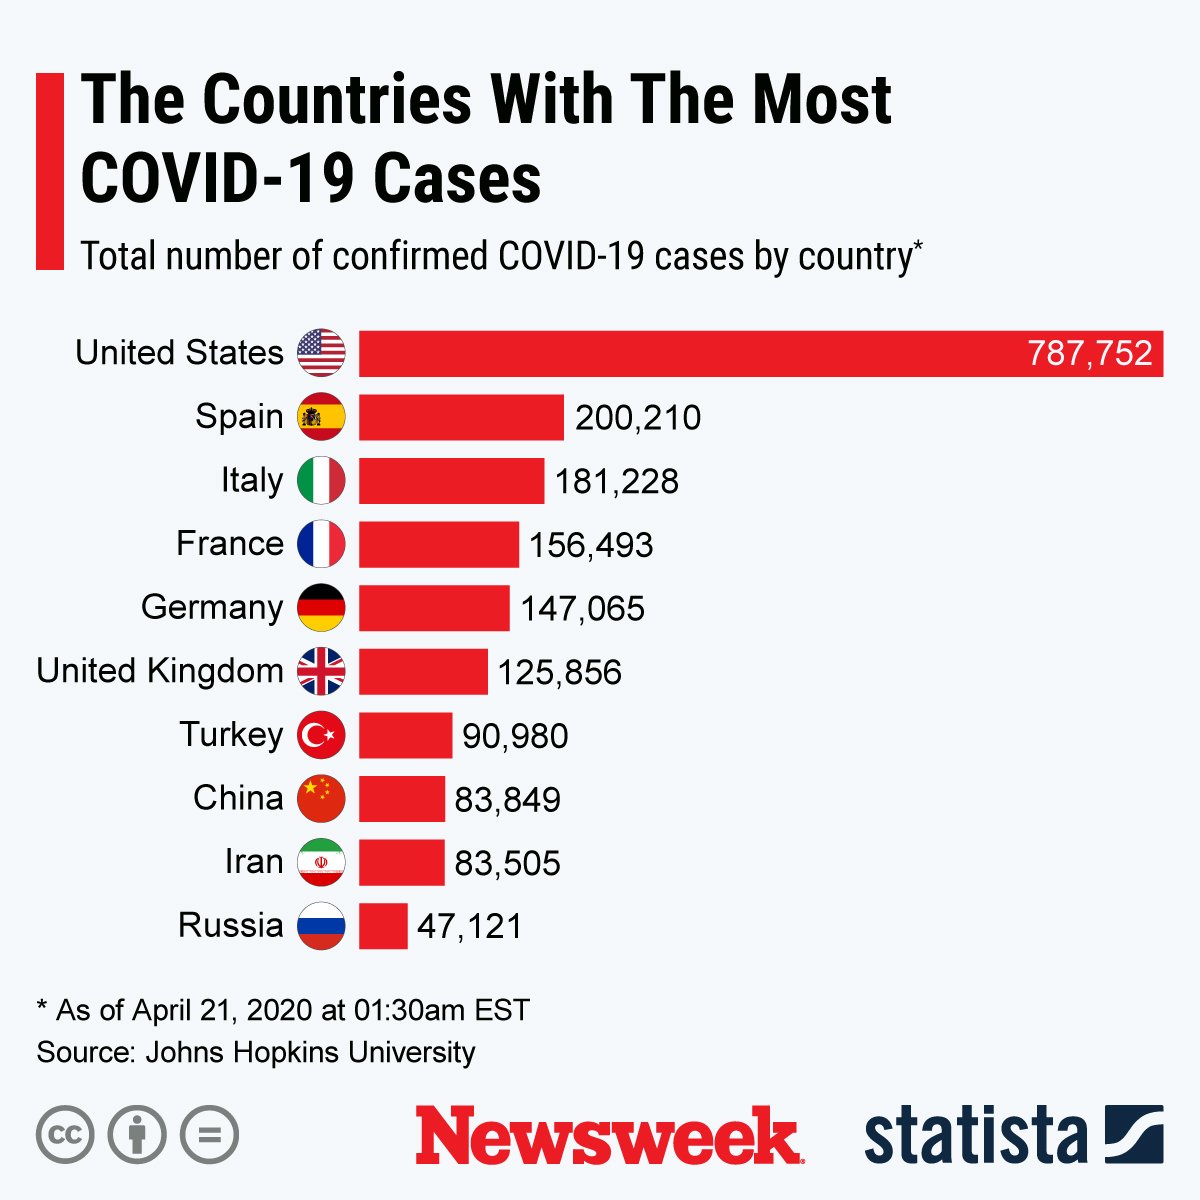 Countries with the most COVID-19 cases